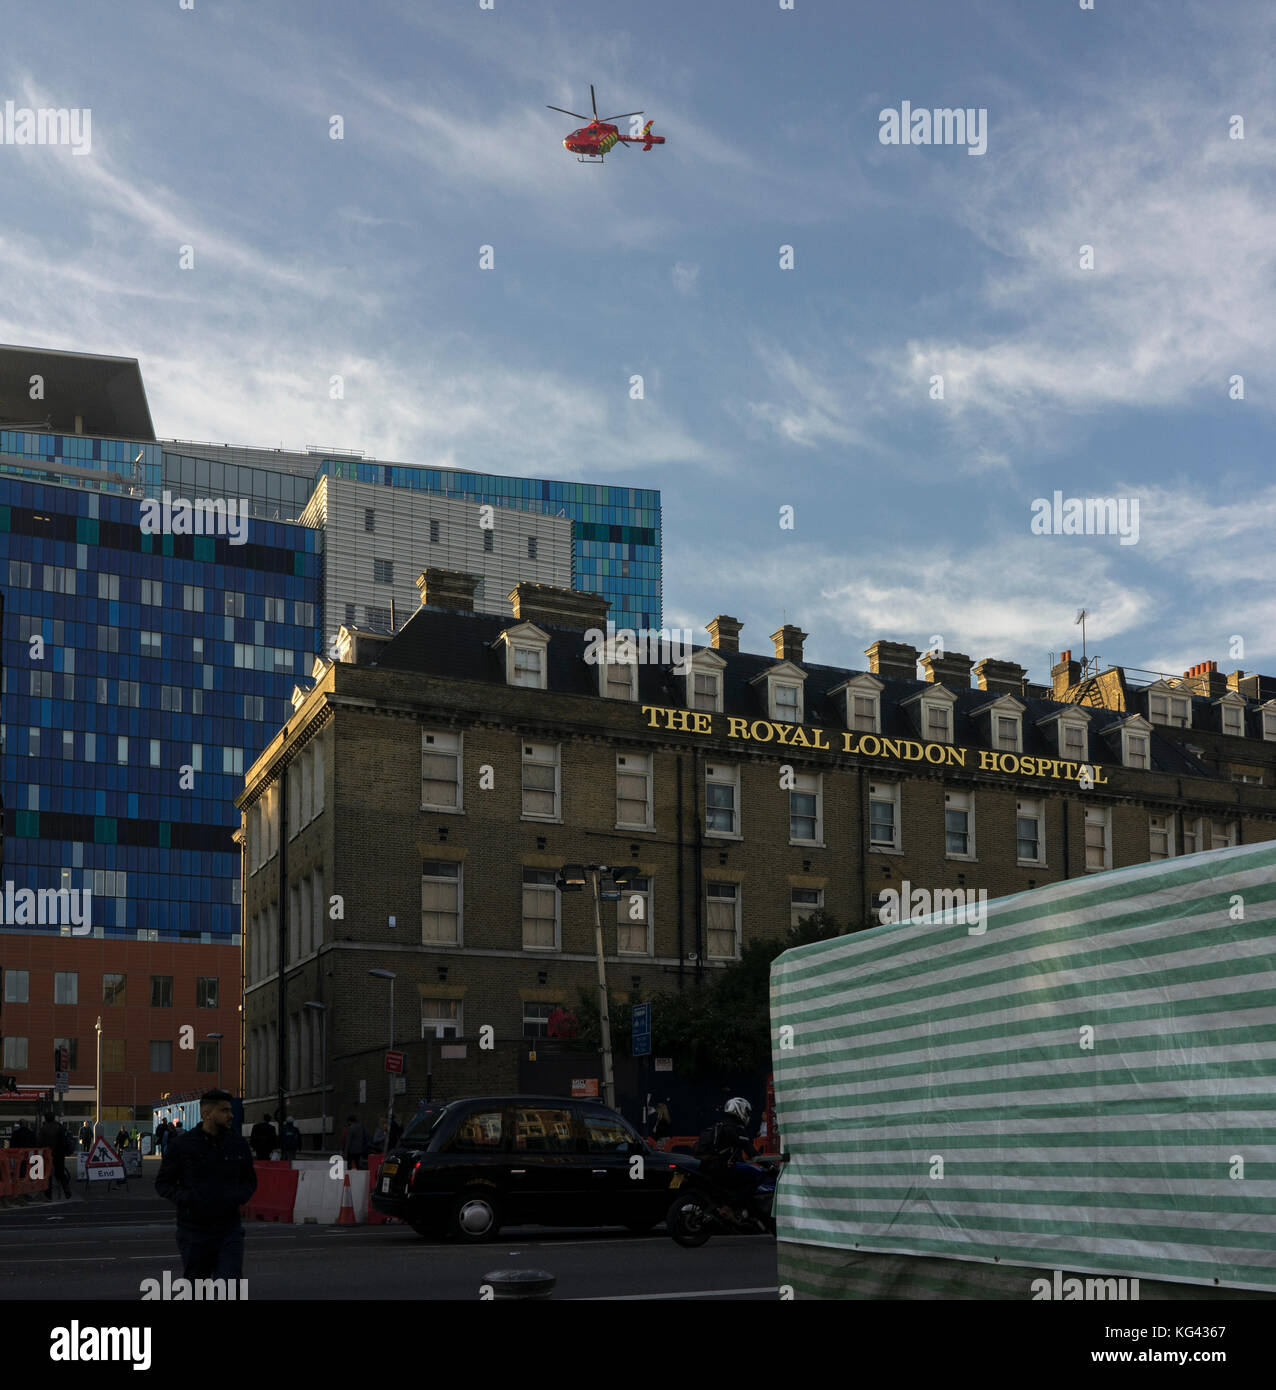 London Air Ambulance arrives at the new Royal London Hospital in Whitechapel in London early in the morning Stock Photo